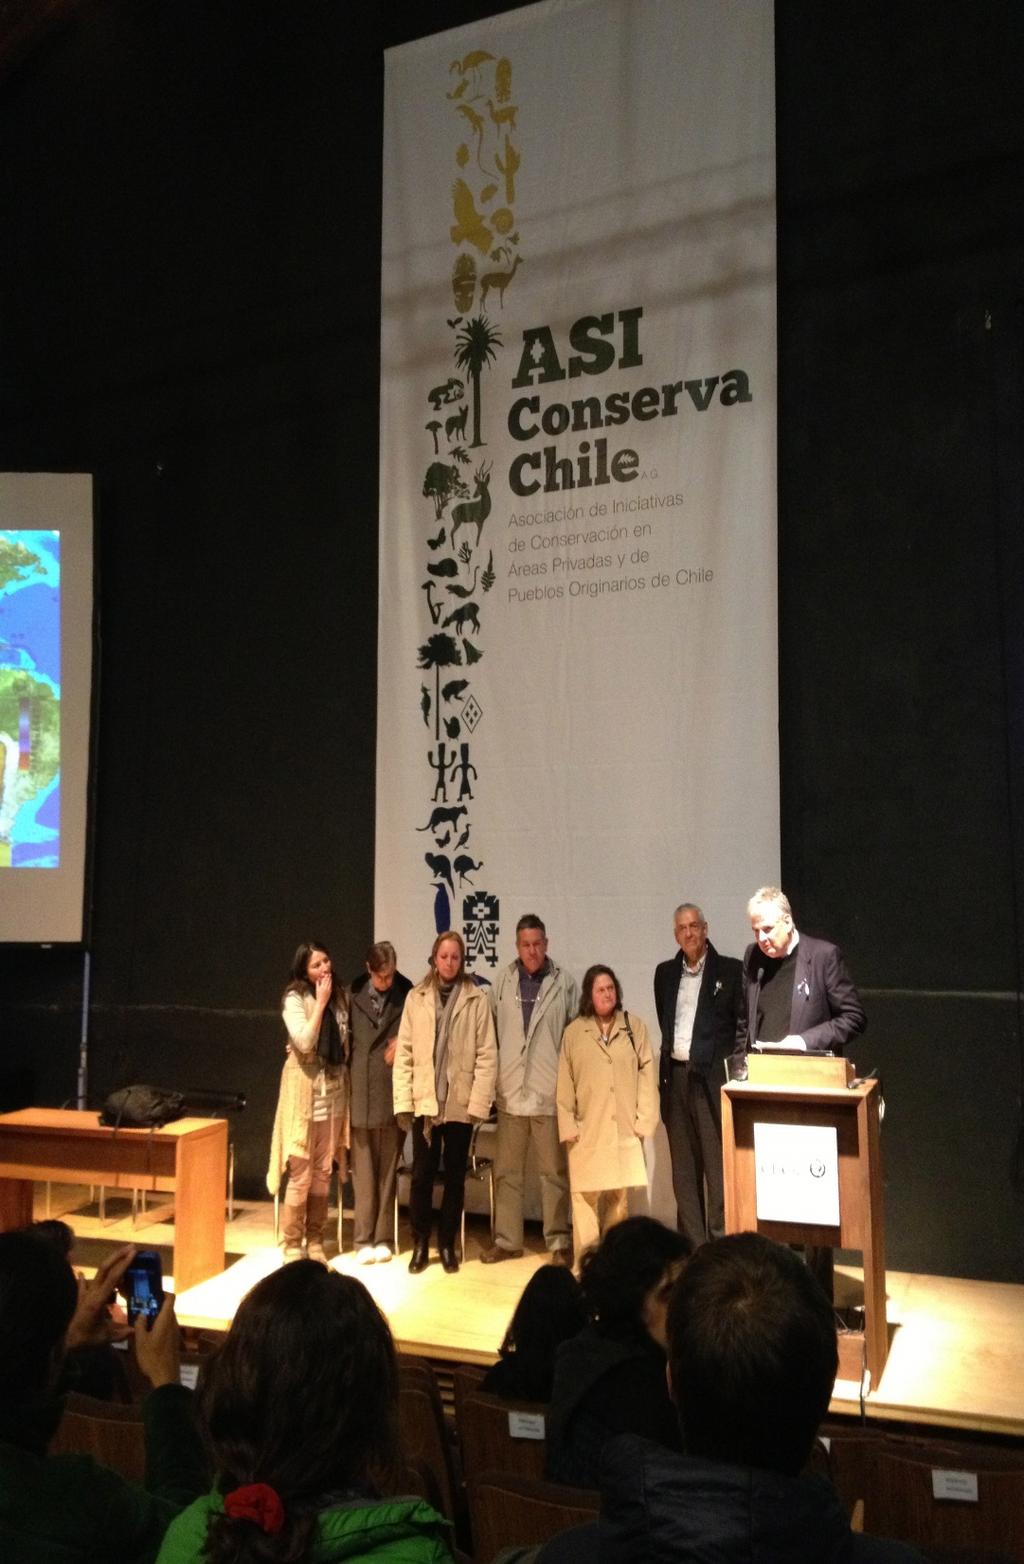 ASI Conserva Chile Who We Are Our members are property owners large and small; families, foundations, universities, indigenous and rural communities; tourism and real estate companies, and people